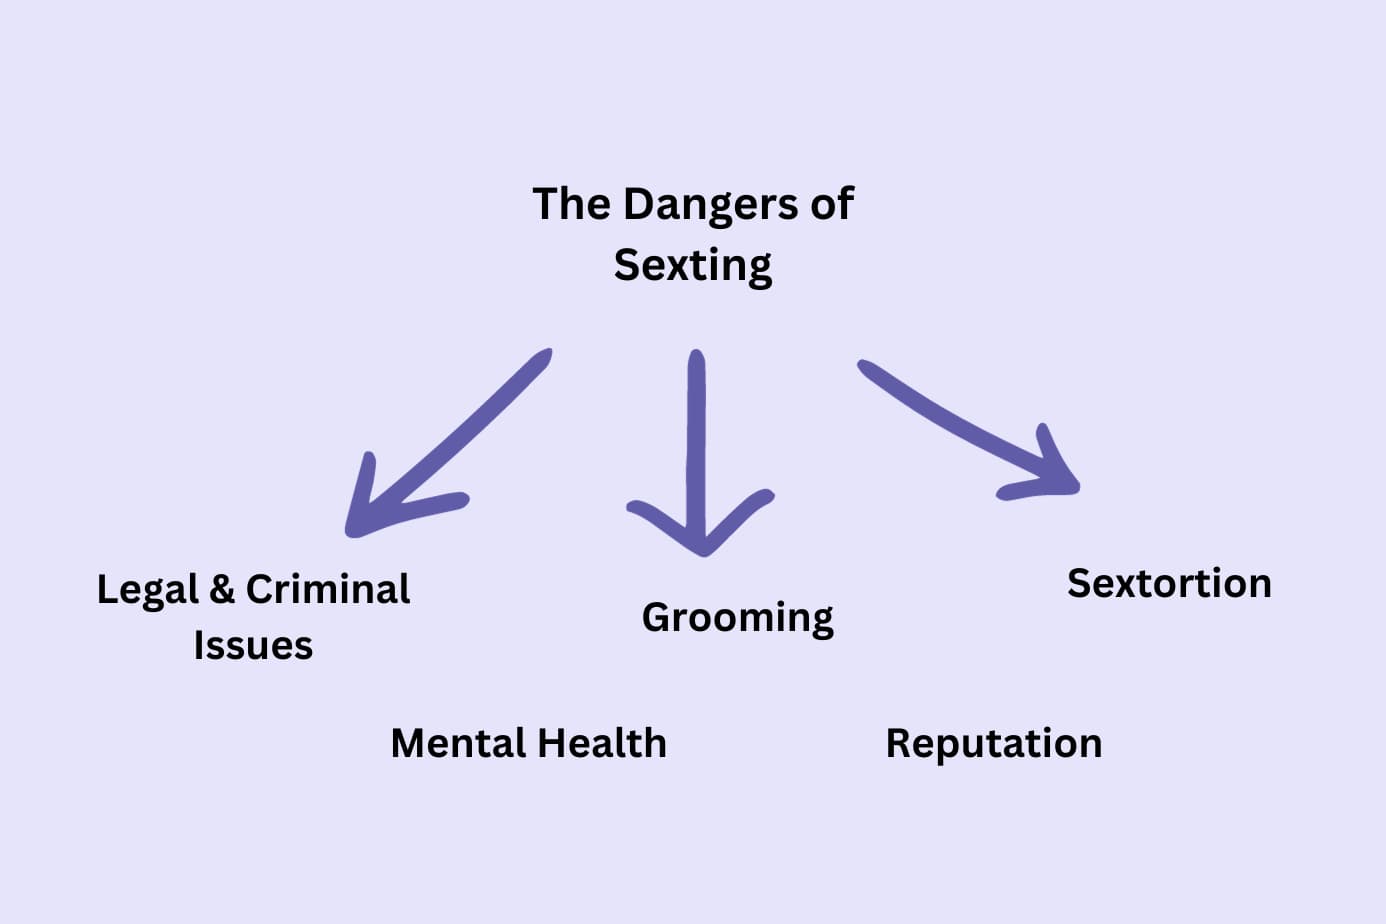 5 Dangers of Sexting | Consequences of Inappropriate Content